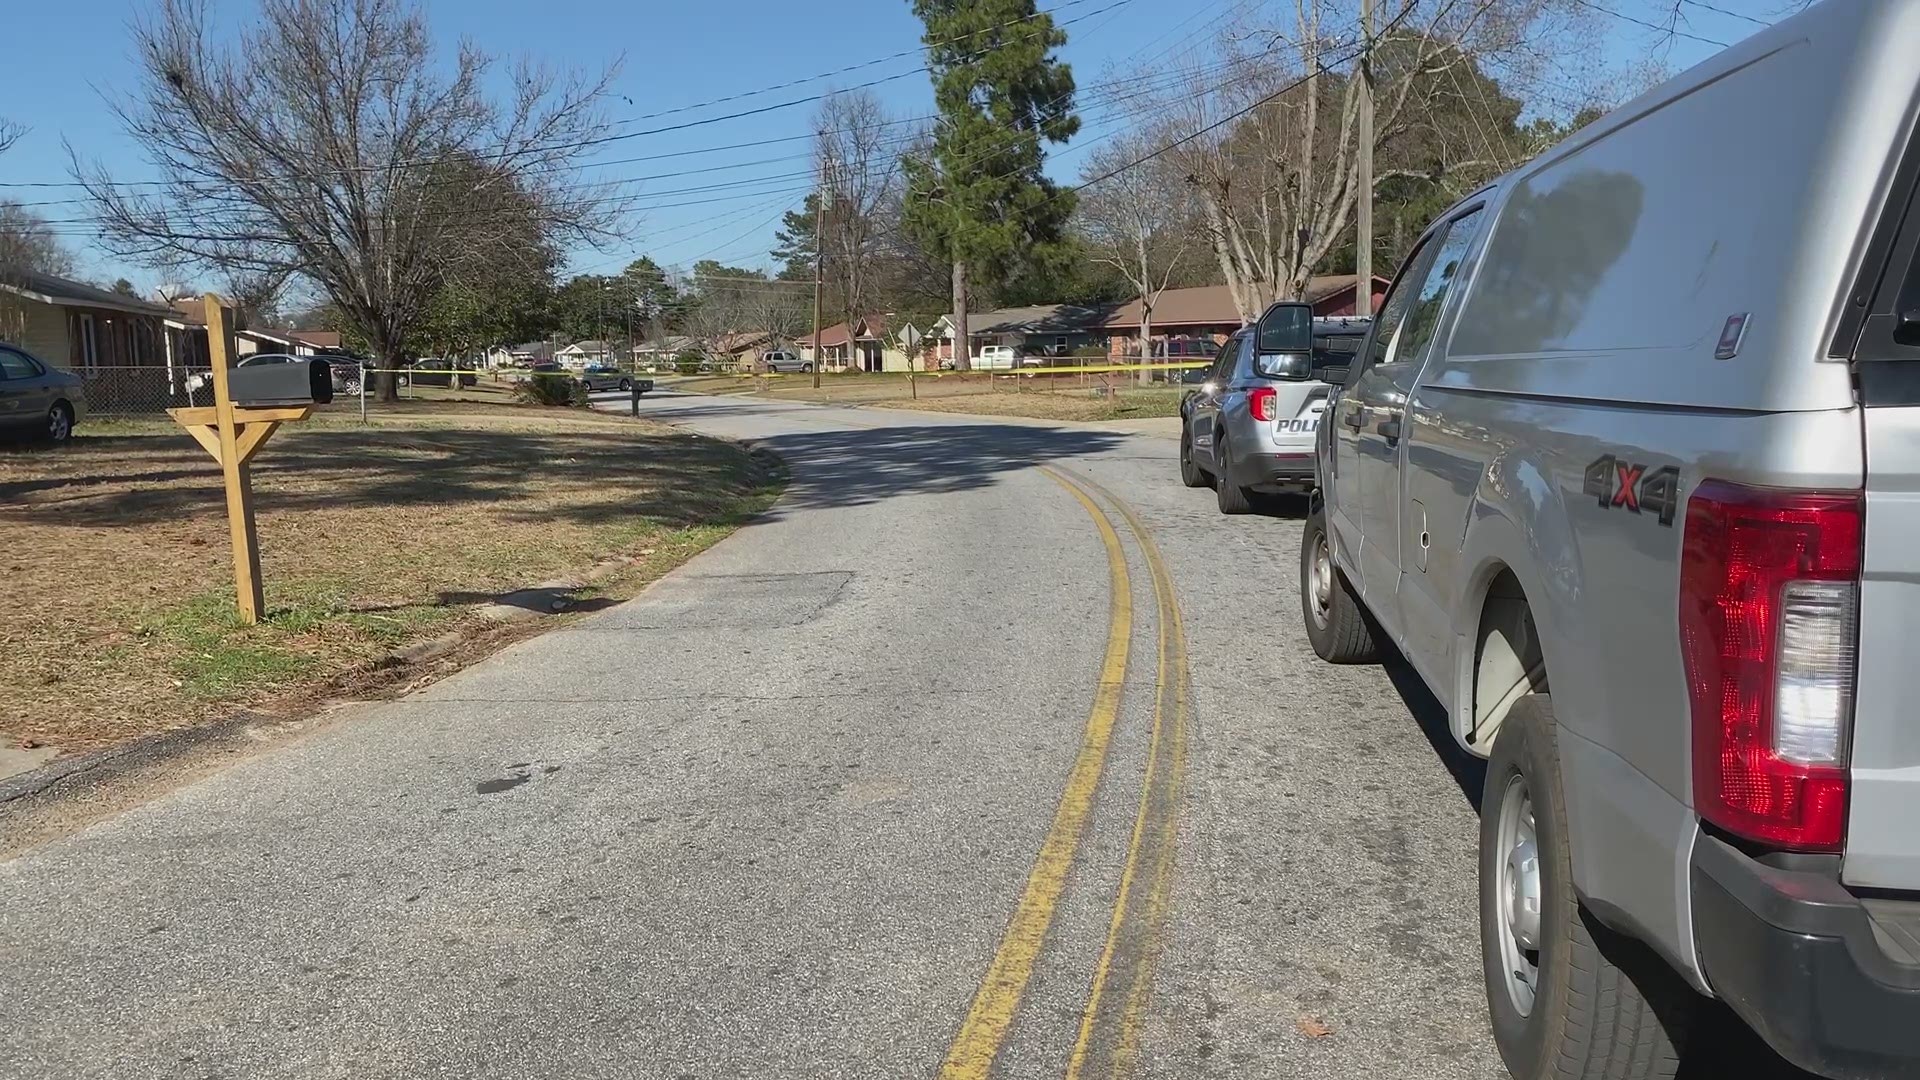 A man is in custody after refusing to stop for Warner Robins Police officers, ultimately leading to Northside High School being put on lockdown.